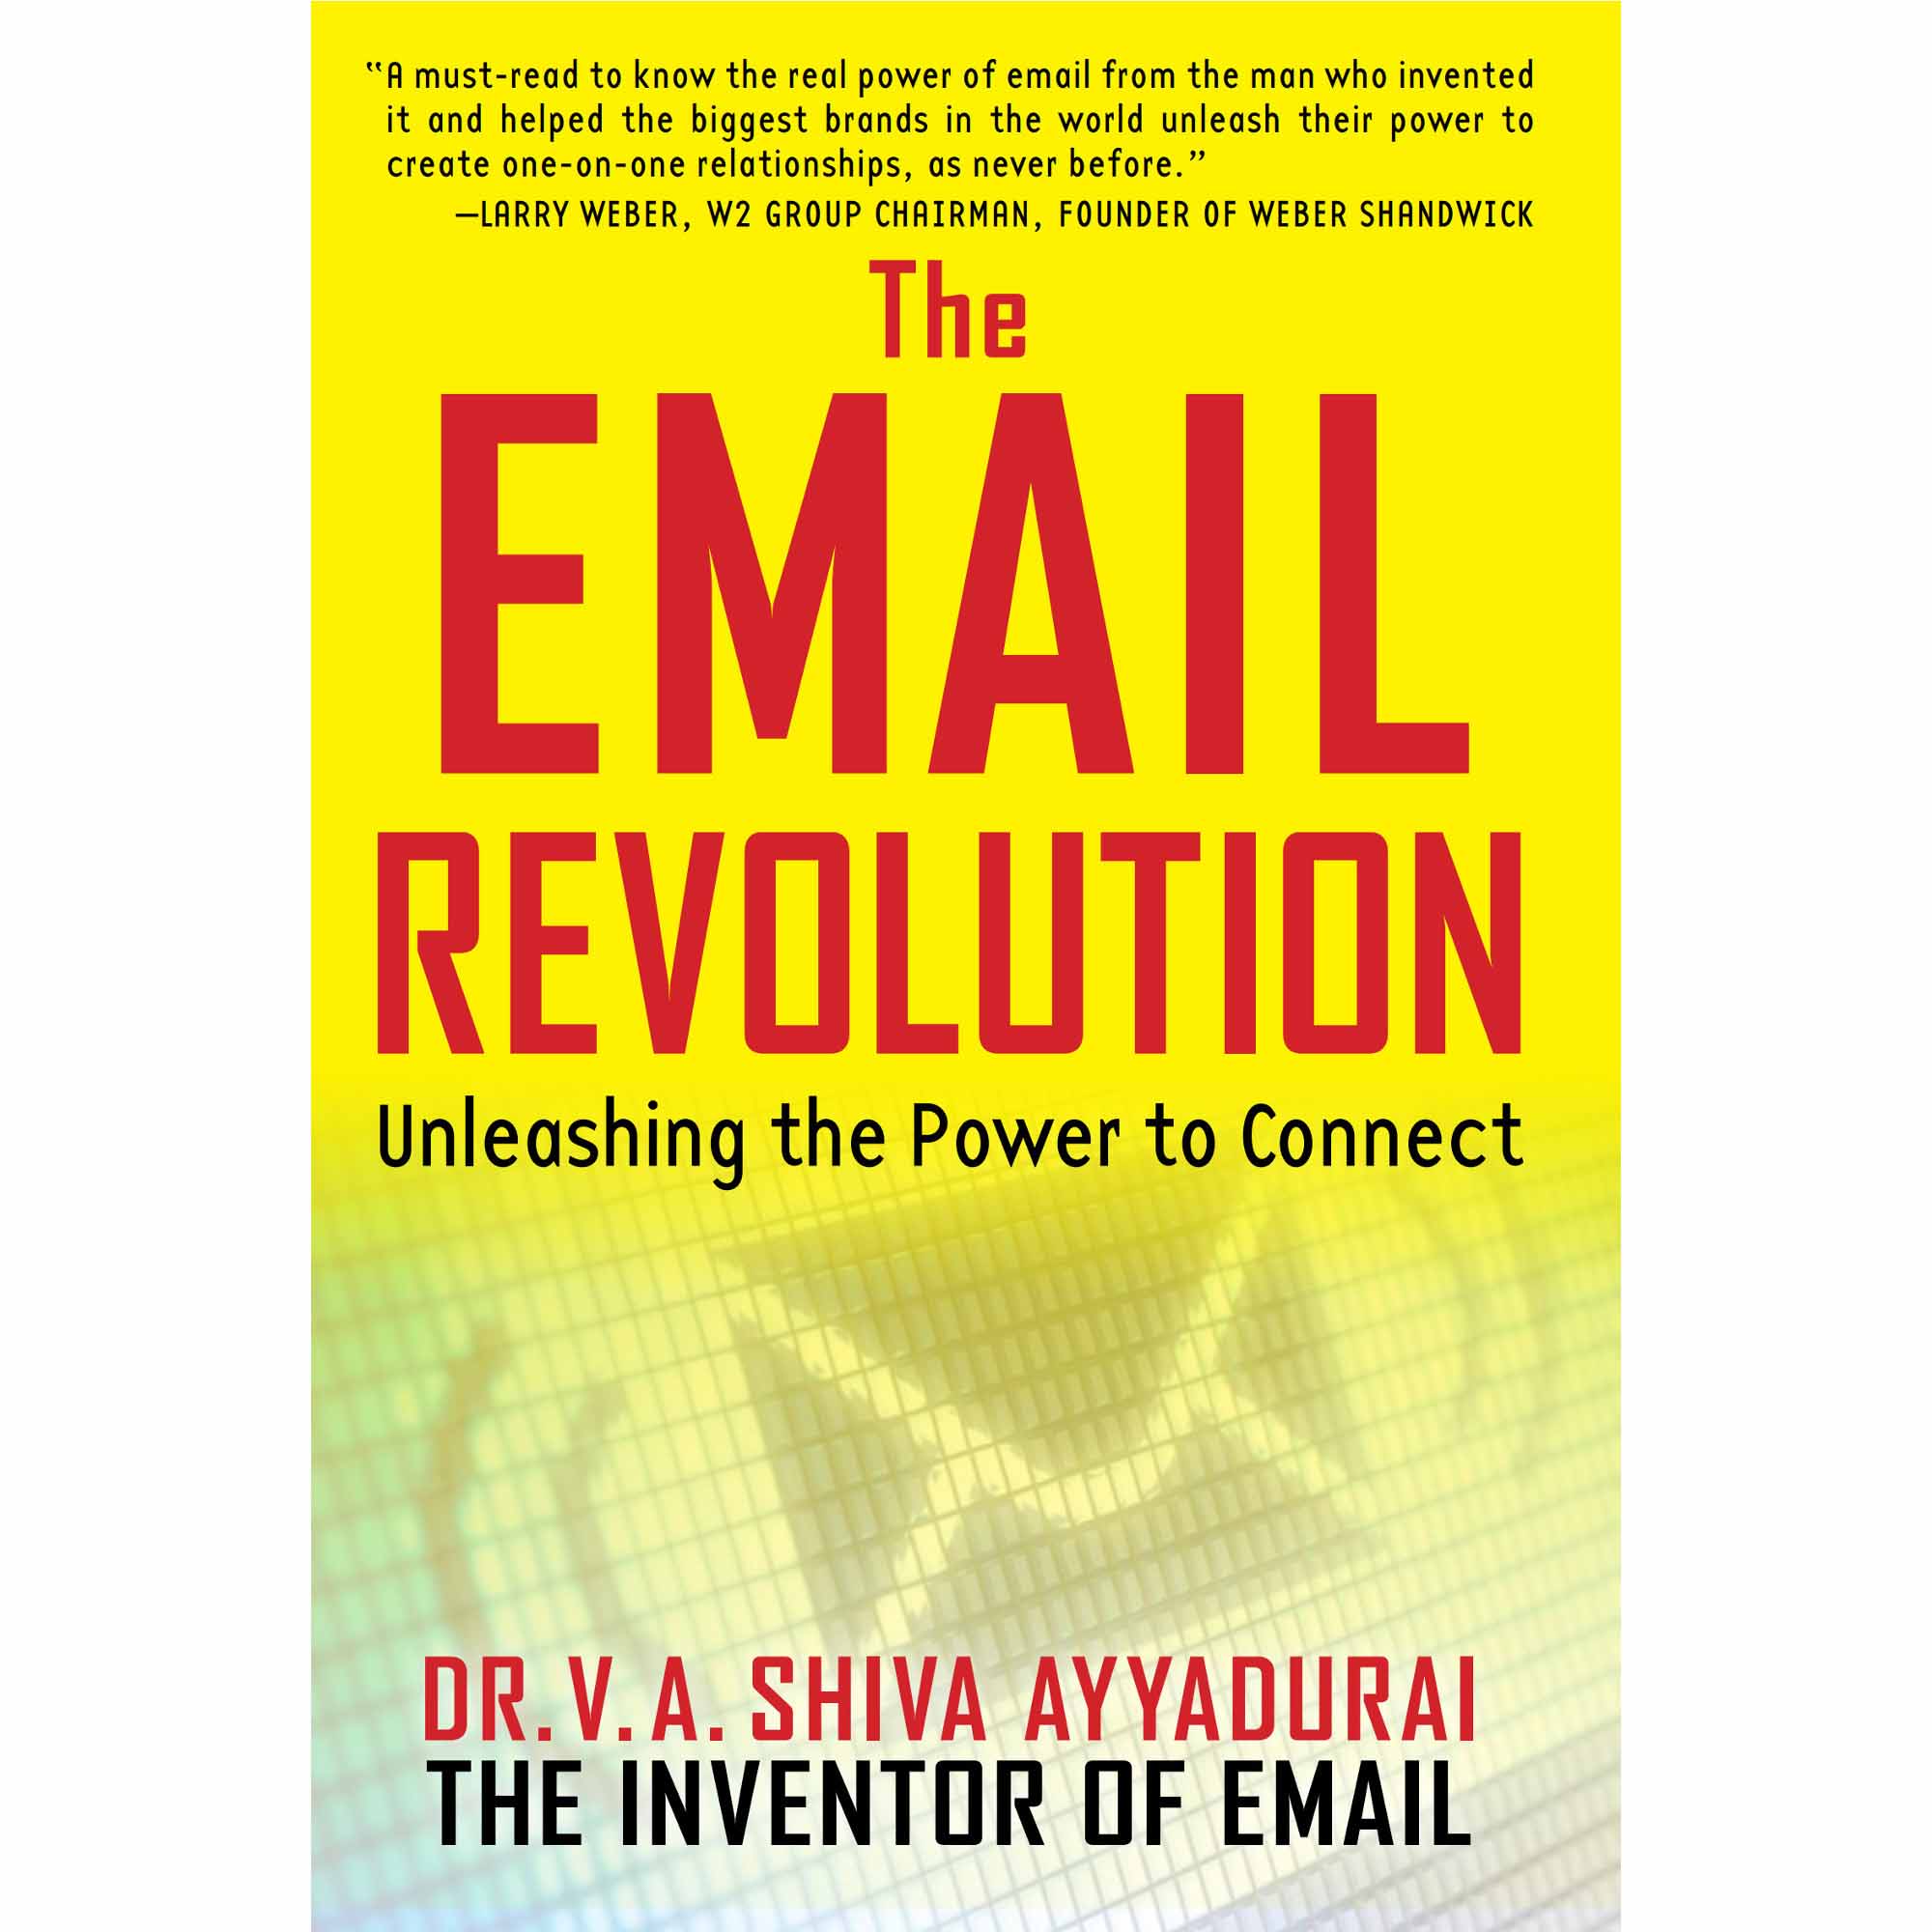 The Email Revolution by Dr. V.A. Shiva Ayyadurai